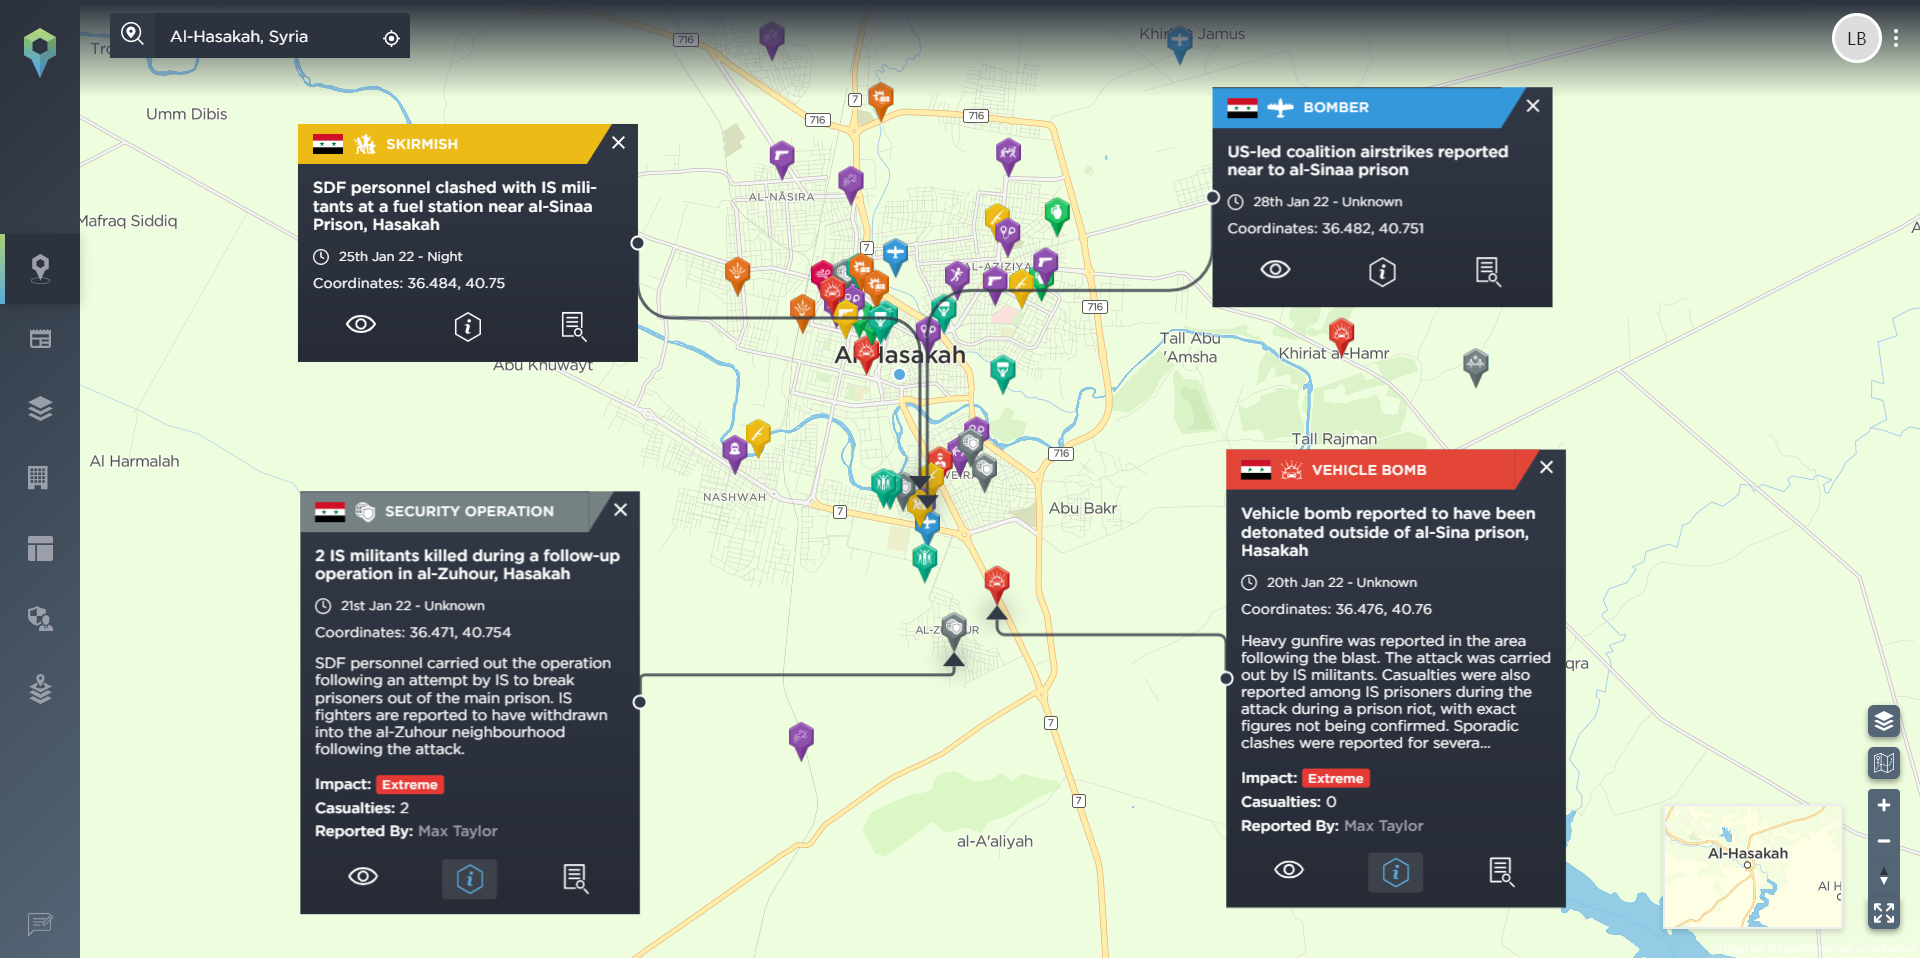 Incidents relating to the riots at Al-Sina prison in January 2022 plotted on a map